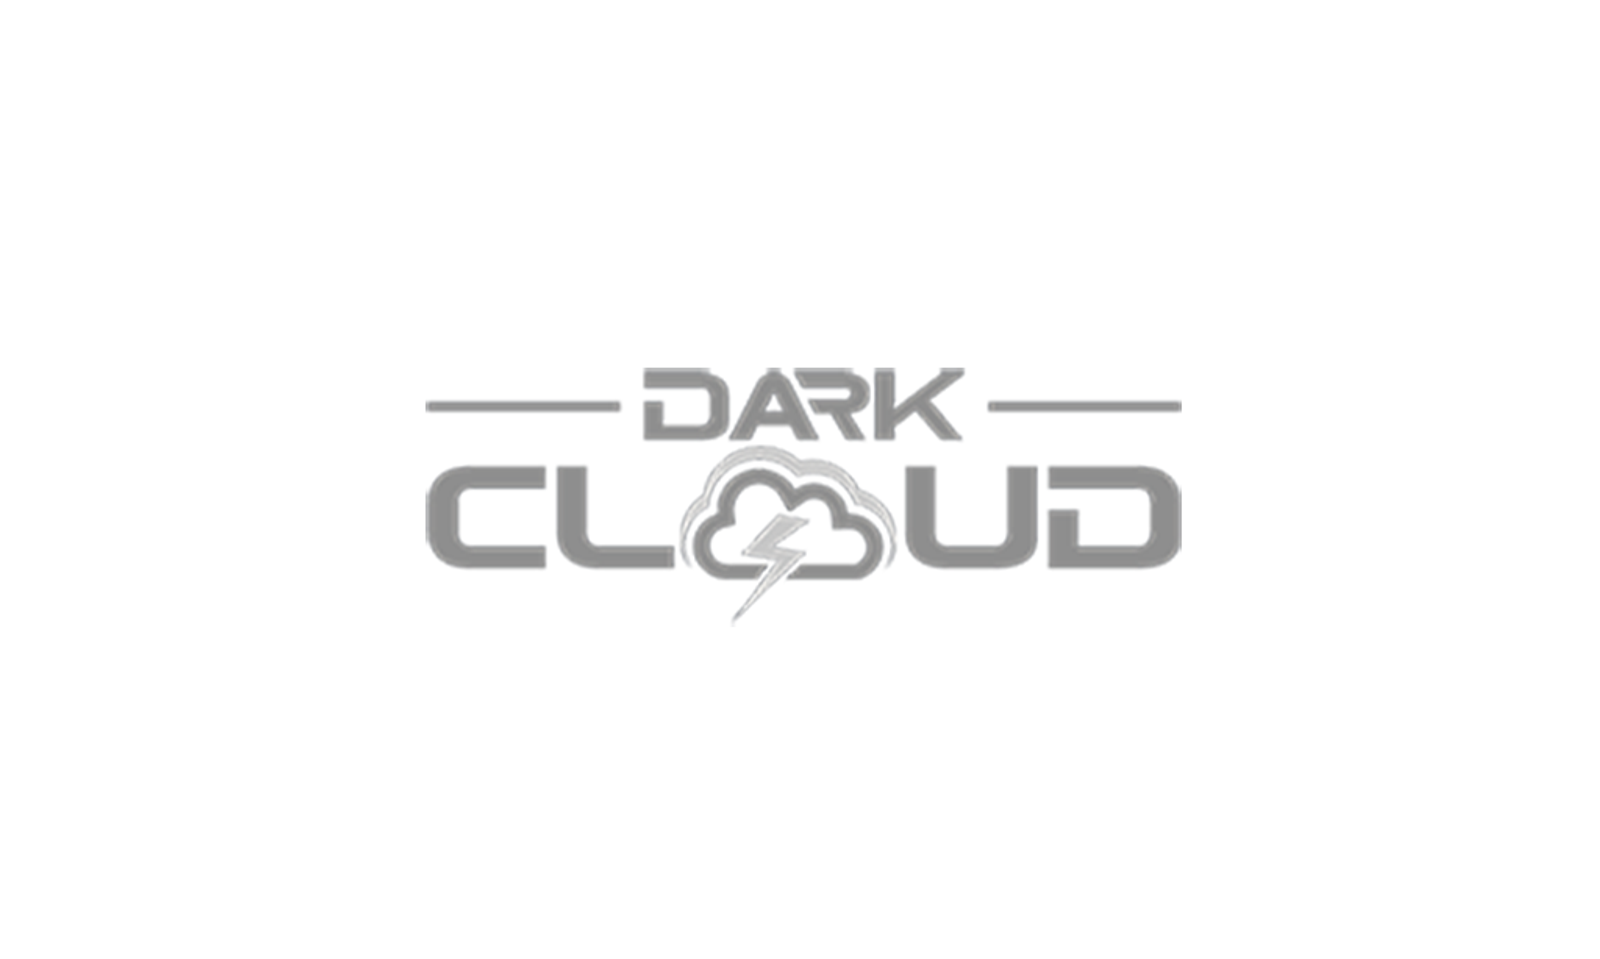 Dark Cloud Offering Replacement for Adult Content On Tumblr